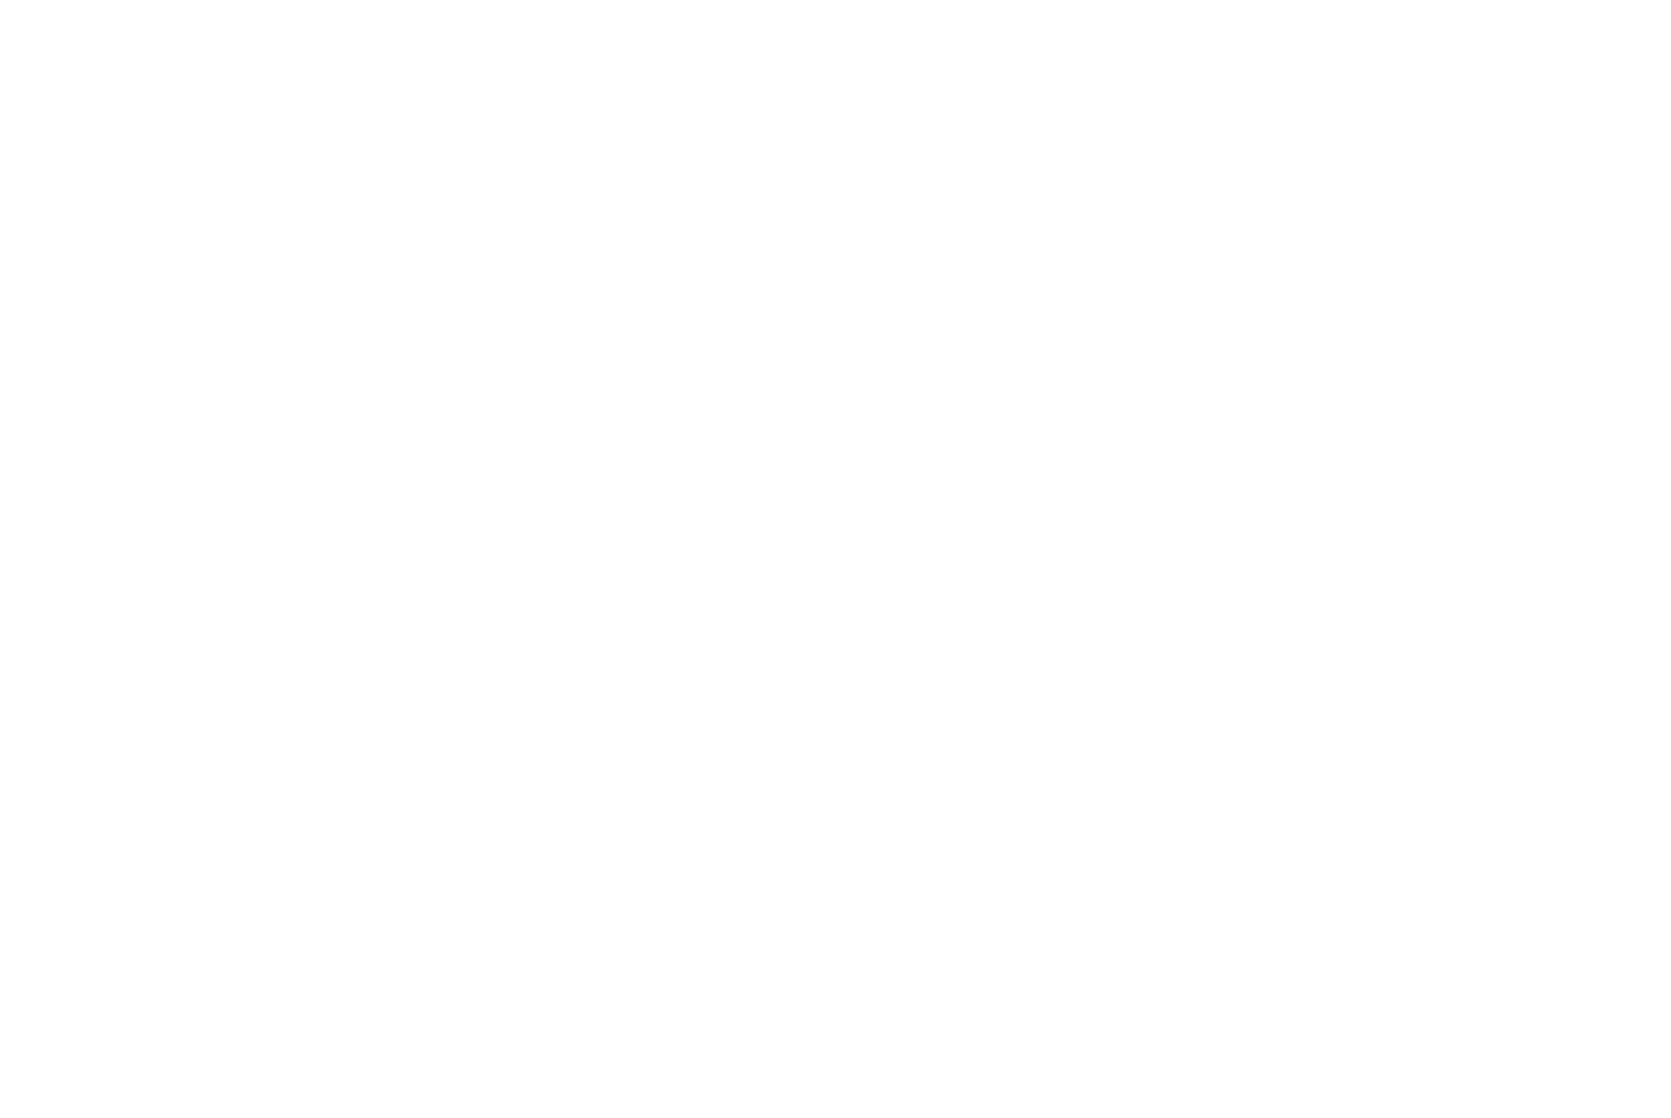 A part of Lyvia